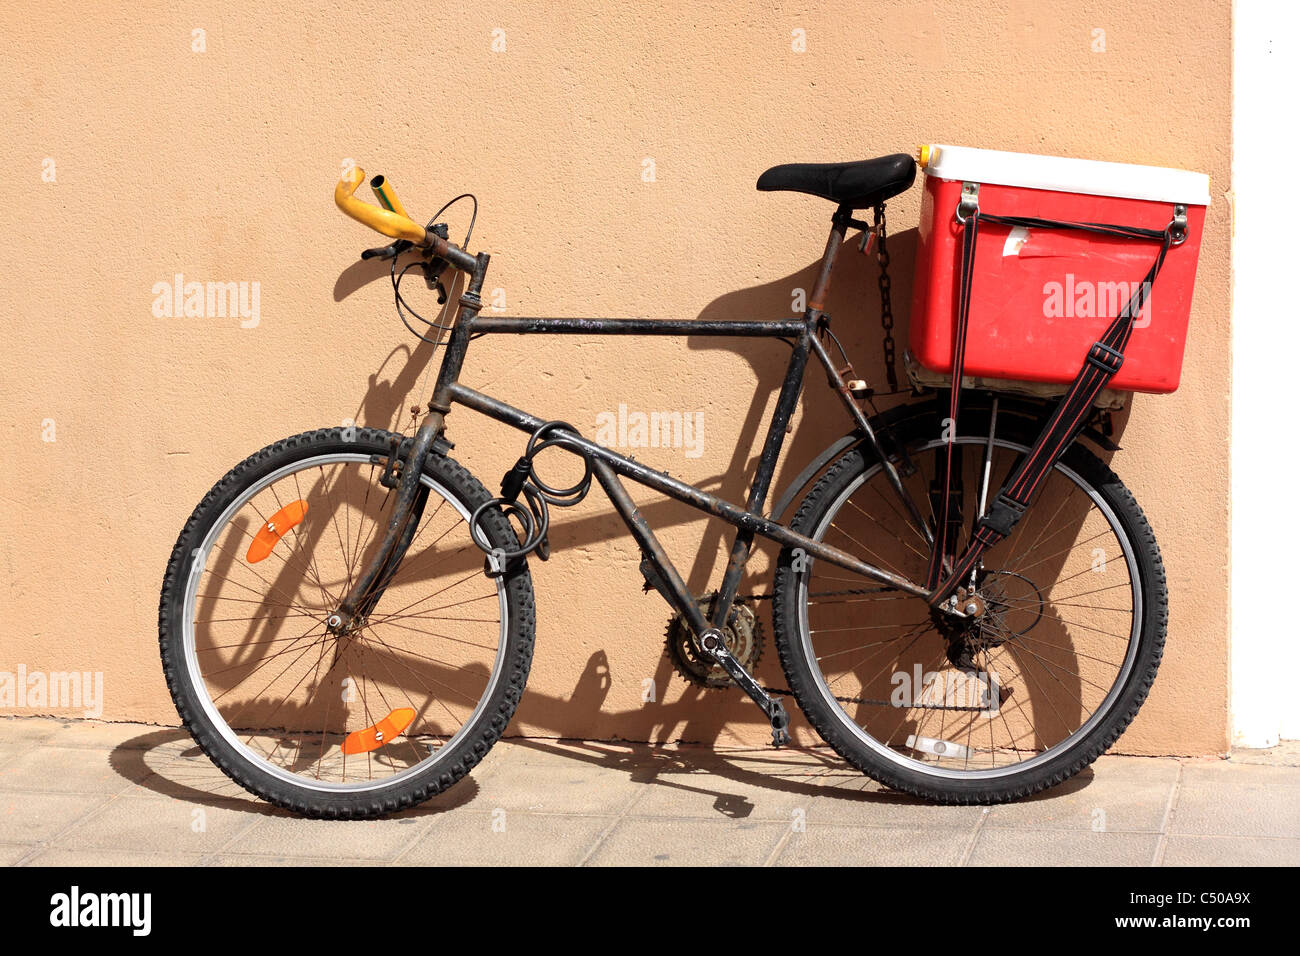 A rusty old black bike leaning against an ochre coloured wall.  A cool box is strapped to a rack at the back of the bicycle. Stock Photo